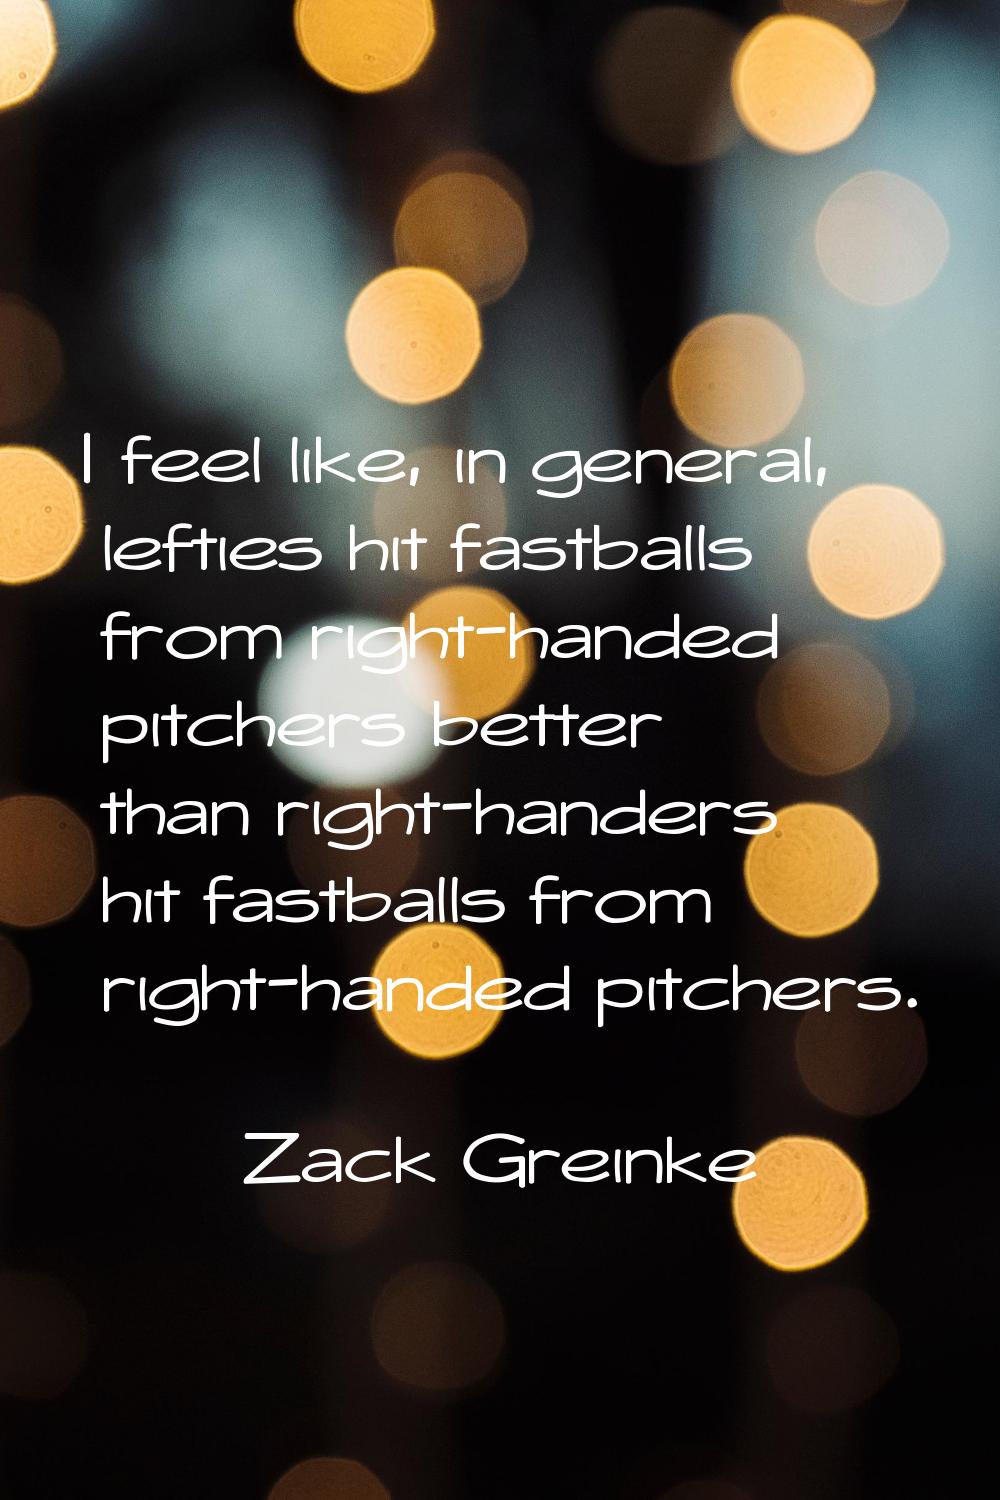 I feel like, in general, lefties hit fastballs from right-handed pitchers better than right-handers